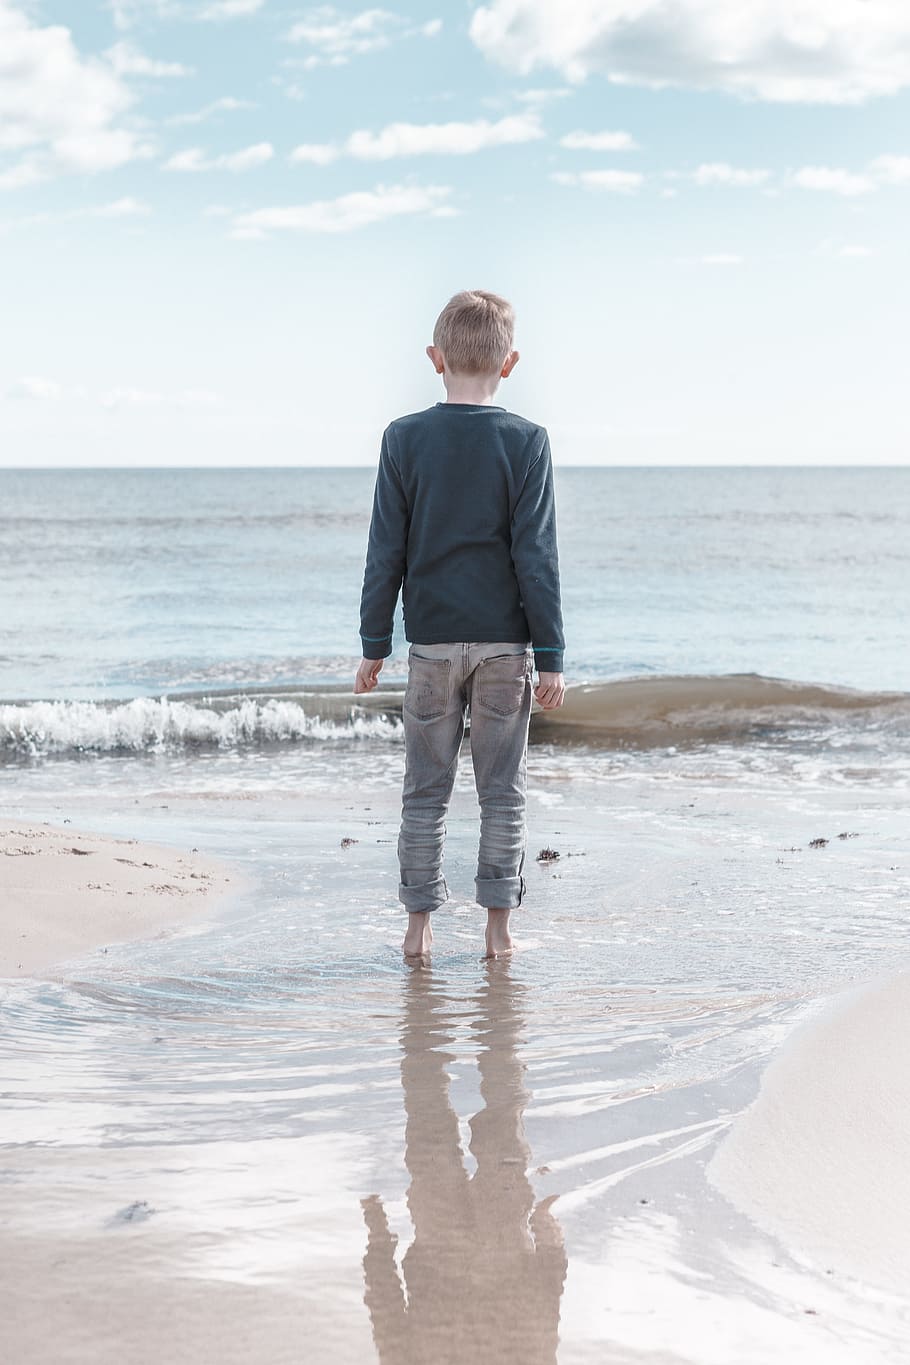 boy, seashore, day time, kid, beach, think, hipster, child, vacation, summer